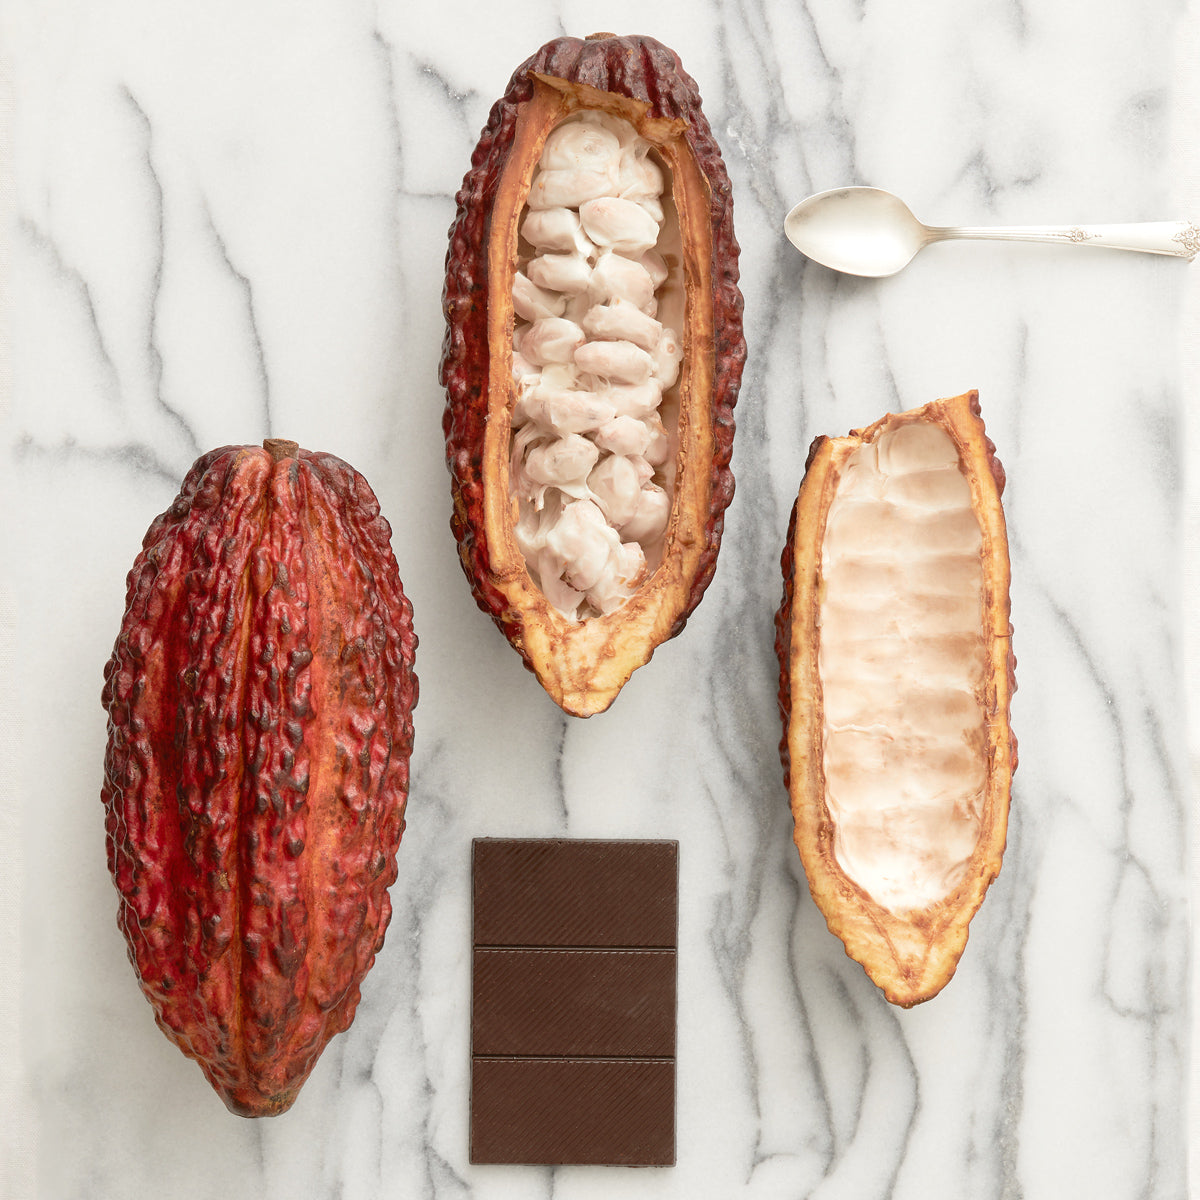 vosges-haut-chocolat-blog/the-health-benefits-of-raw-cacao